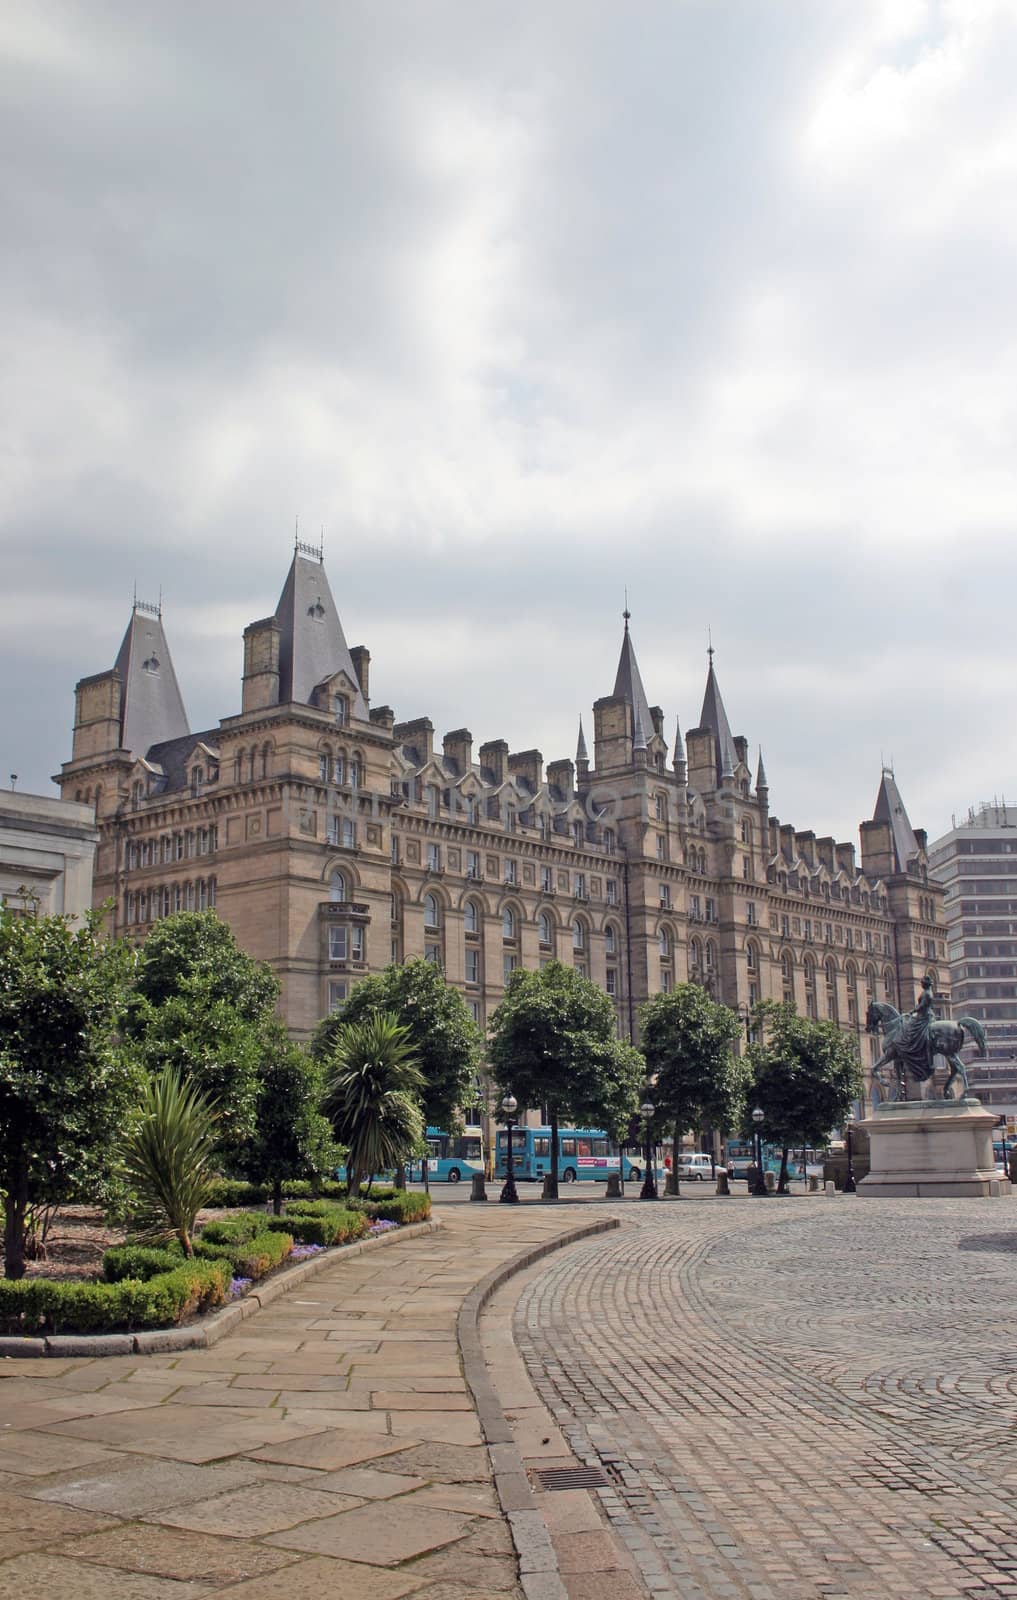 Majestic Lime Street Hotel in Liverpool England